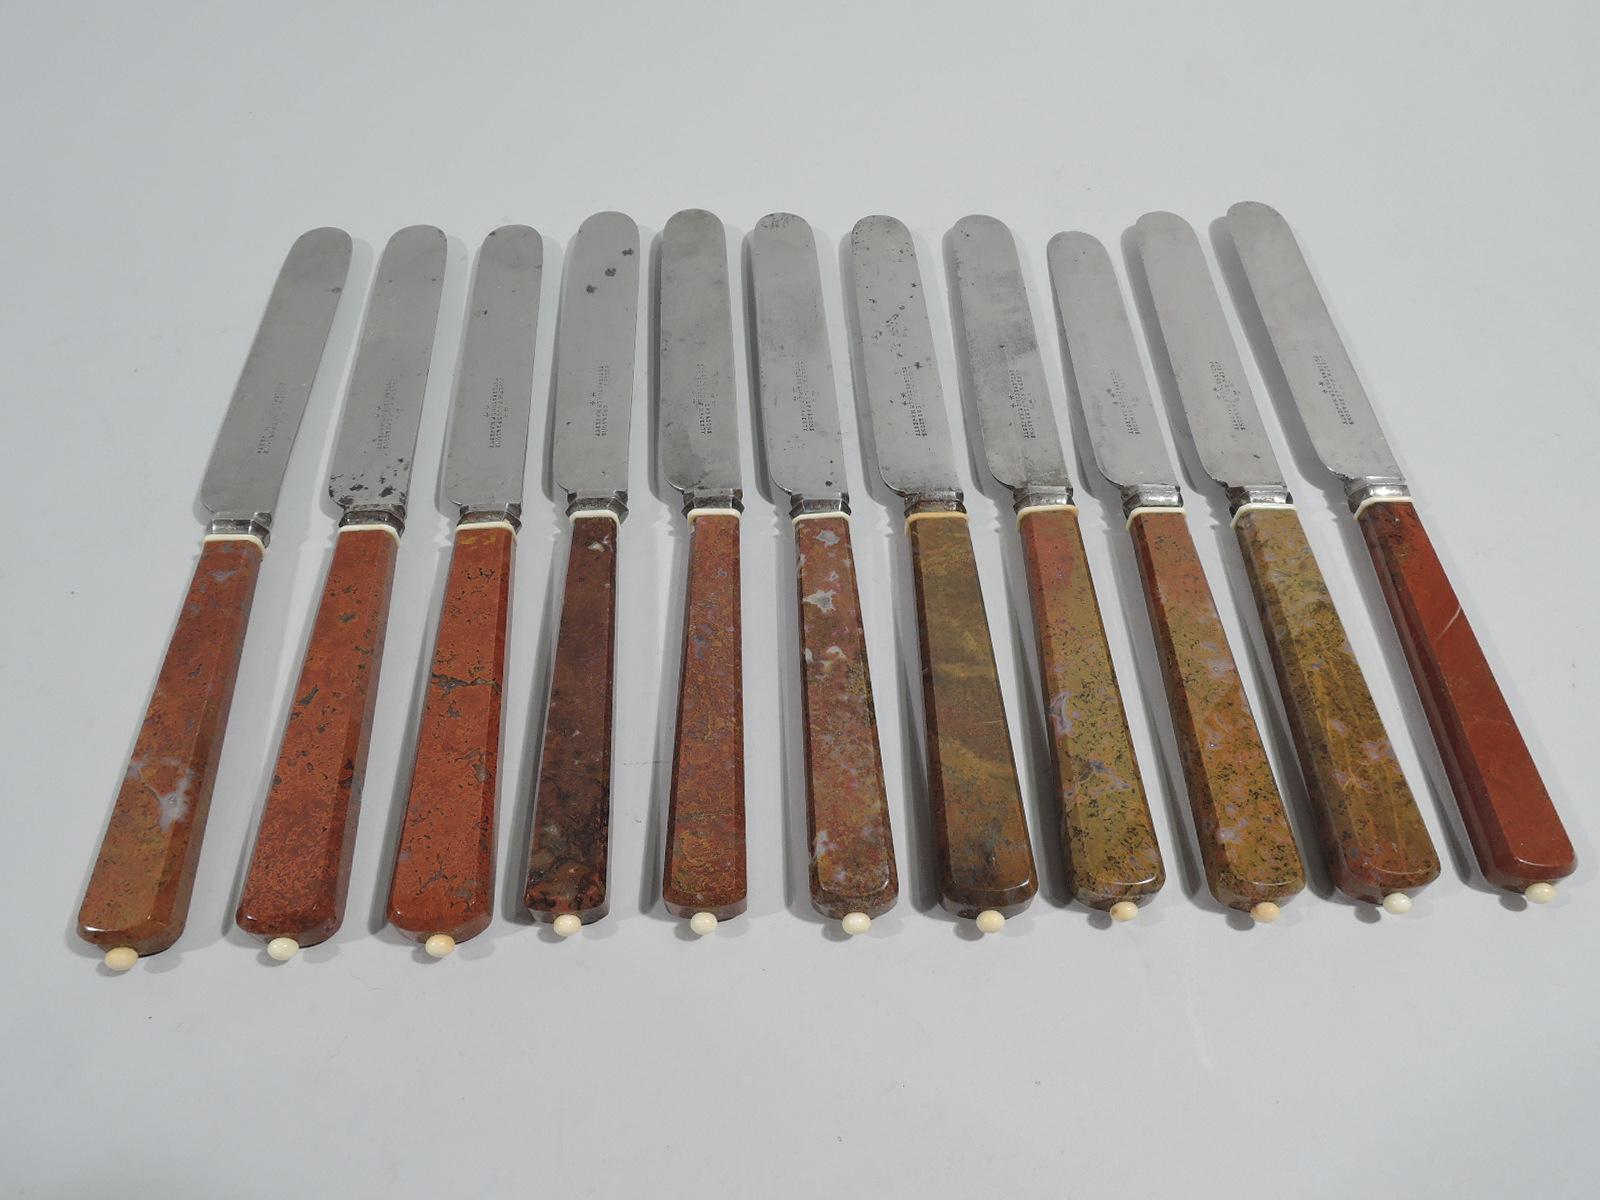 Set of 11 English Victorian dinner knives, ca 1880. Each: Tapering and chamfered rectilinear agate handle with bead terminal and silver-plated blade. Agate red and mottled in varying shades. Blades marked “Joseph Rodgers & Sons / Cutlers to Her